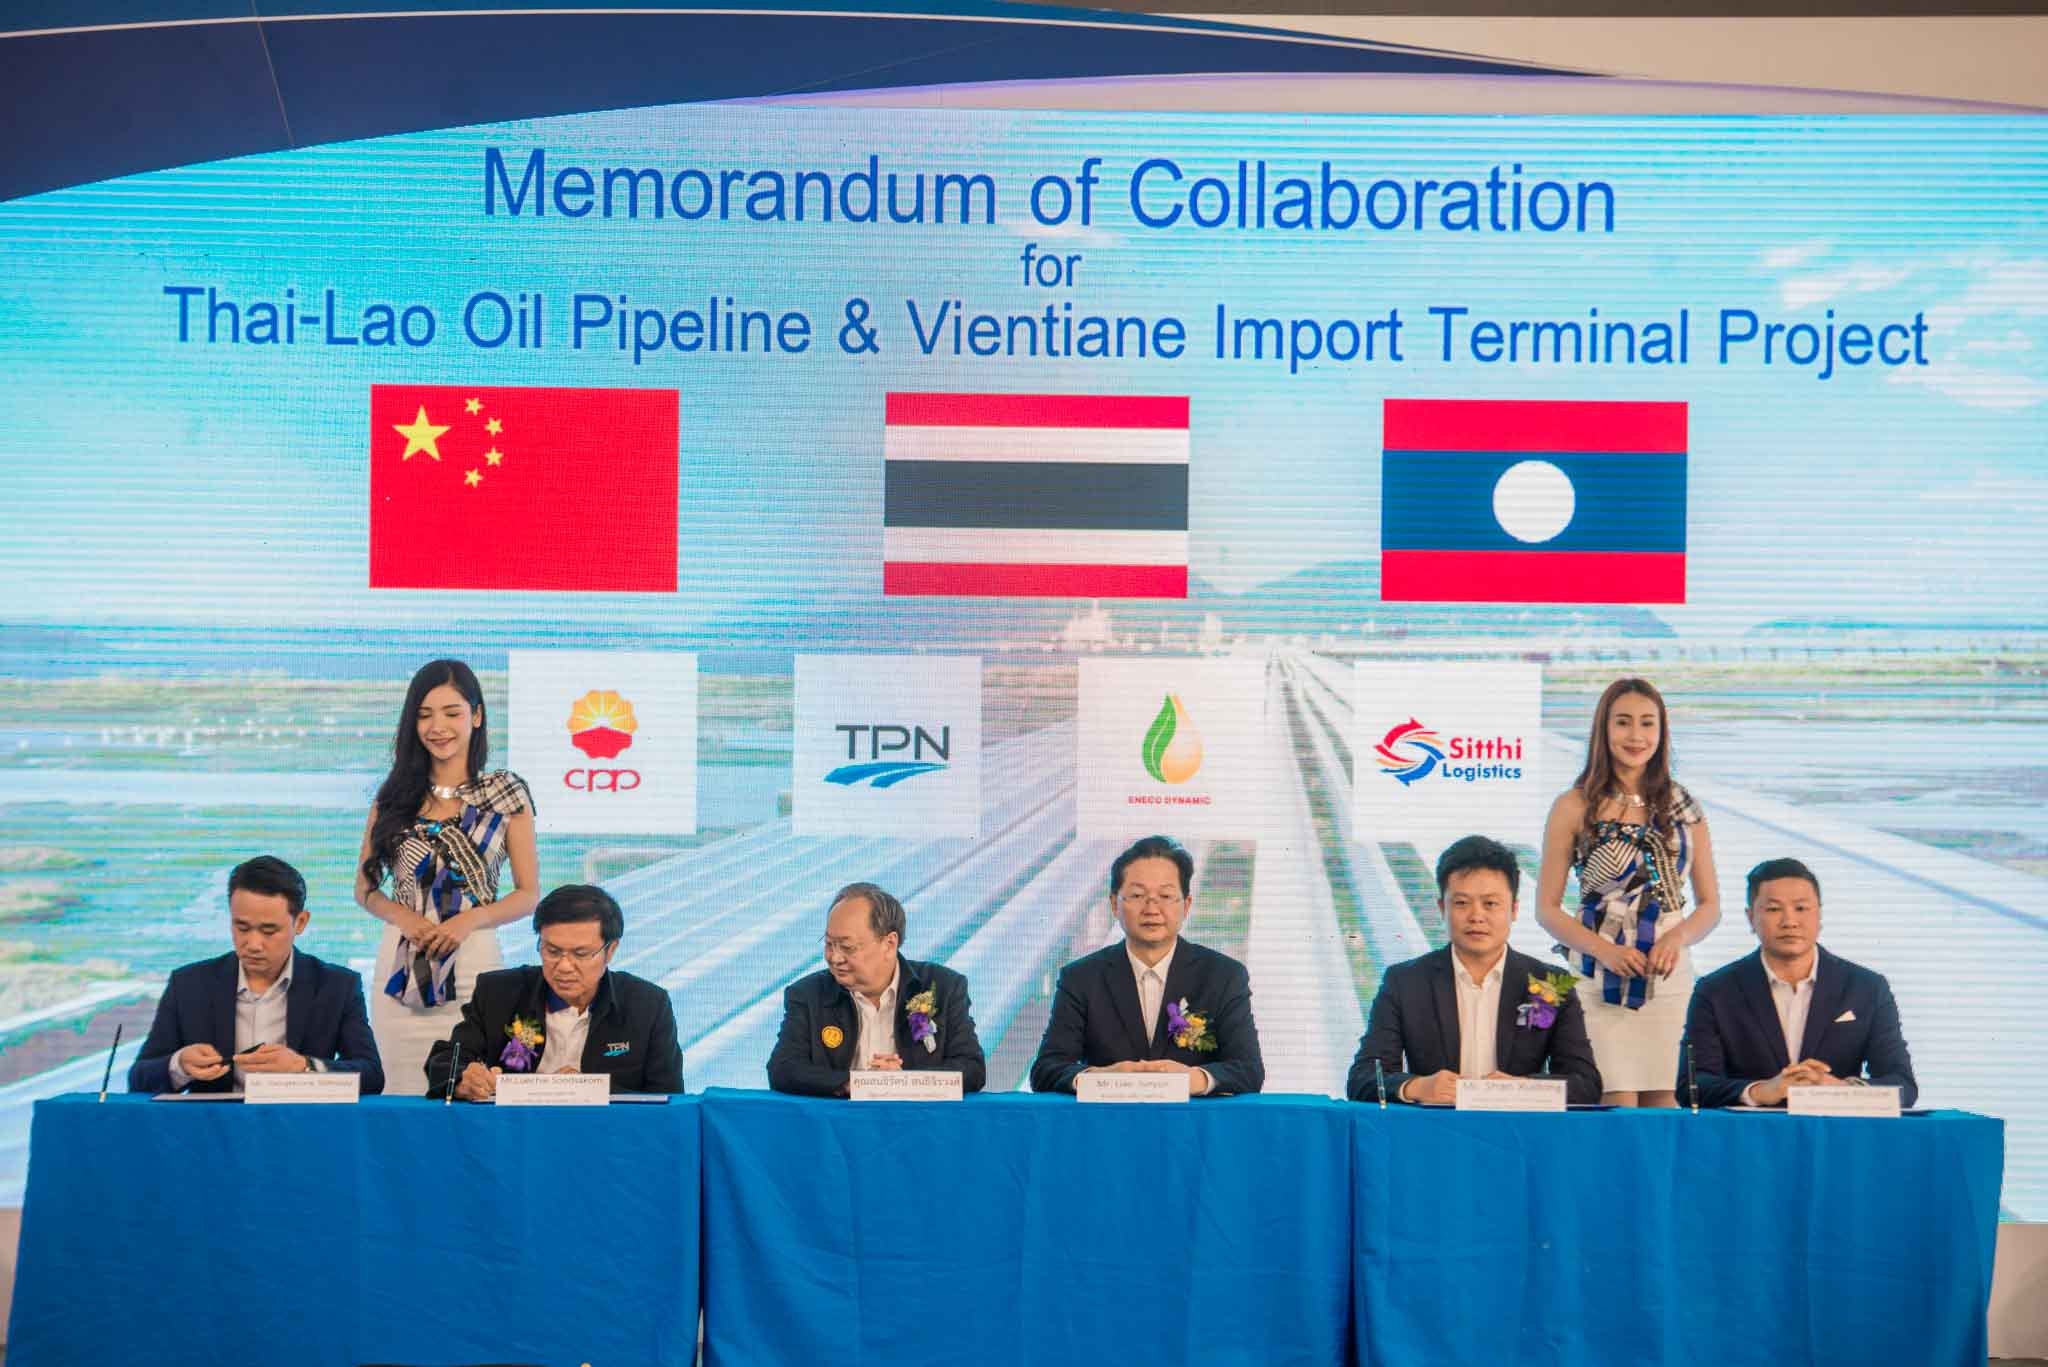 TPN CPP ENECO DYNAMIC and SITTHI LOGISTICS LAO signed the MOU